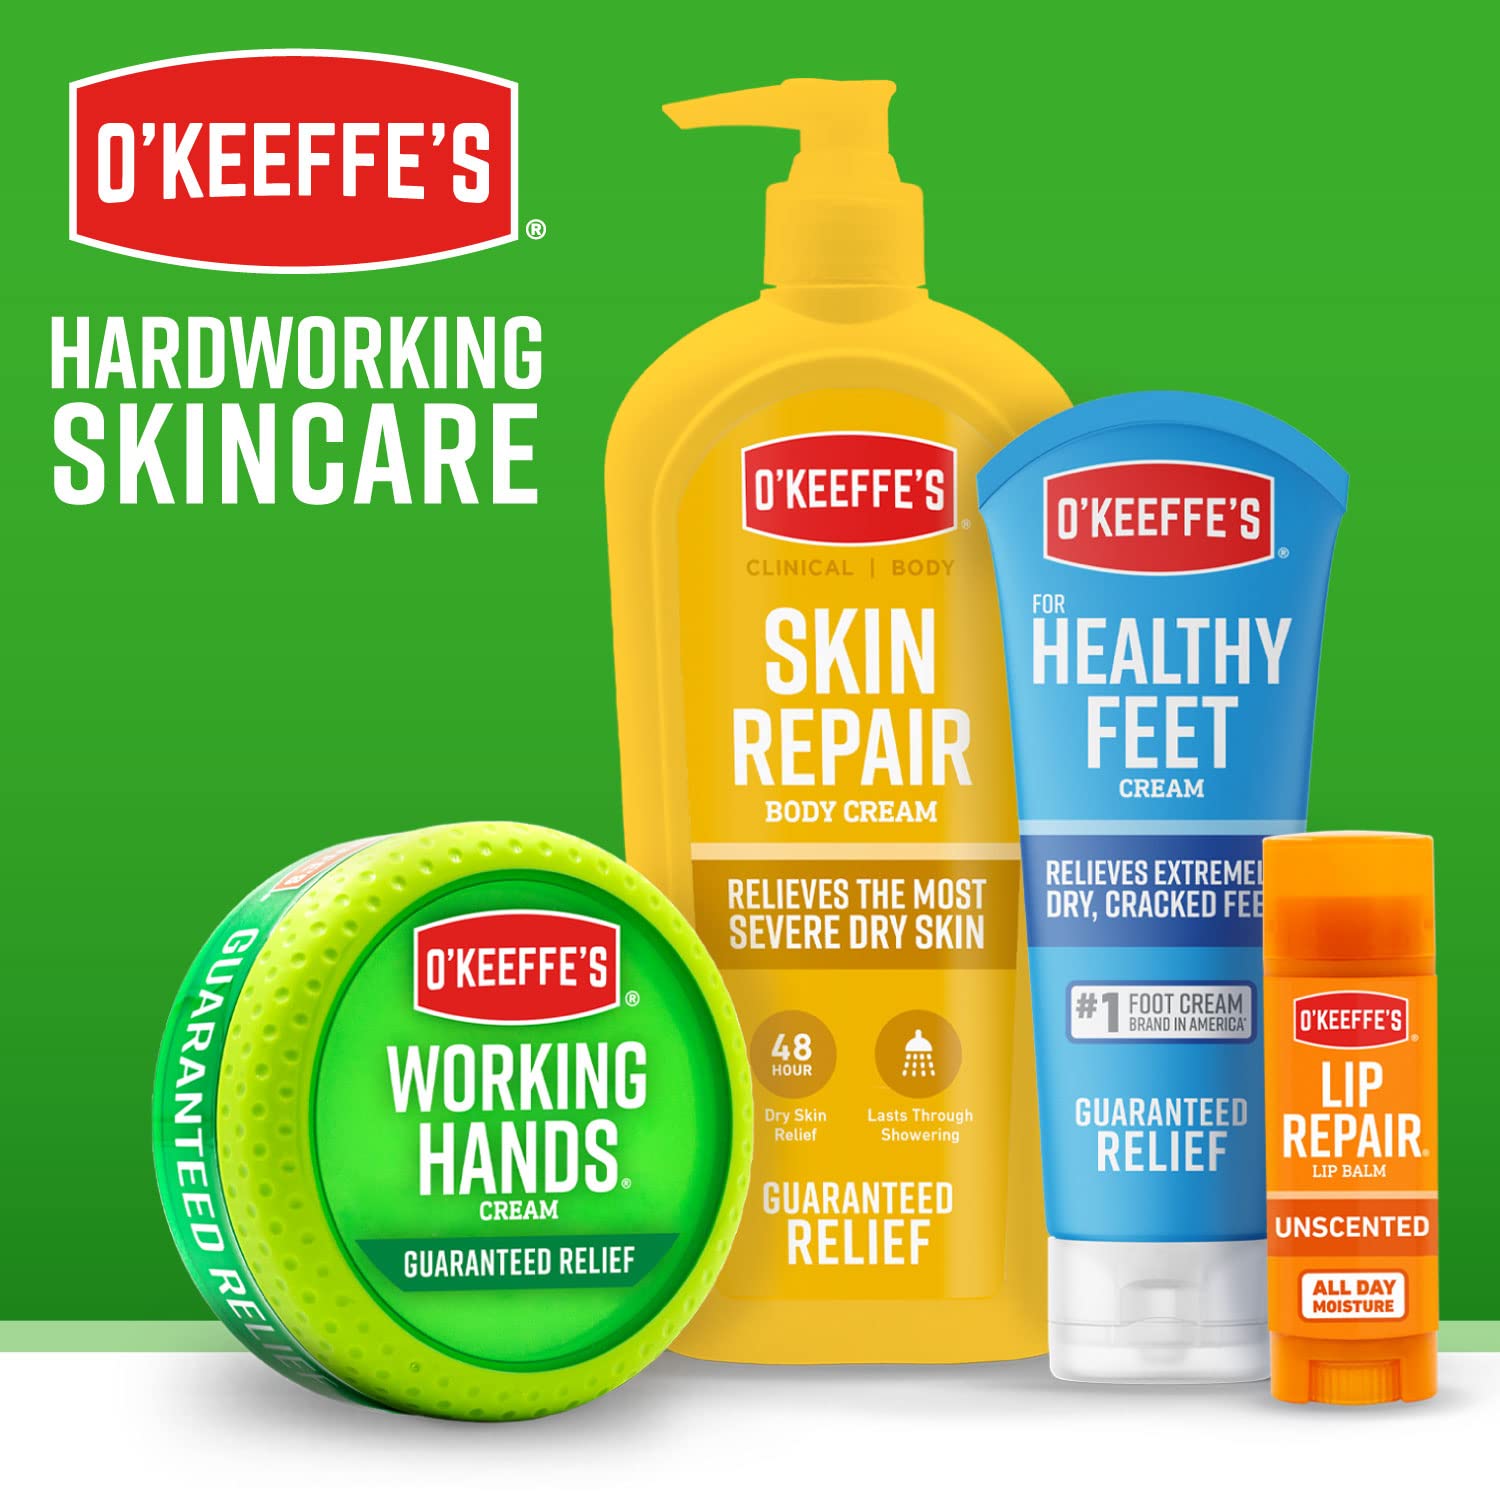 O'Keeffe's for Healthy Feet Foot Cream, Guaranteed Relief for Extremely Dry, Cracked Feet, Instantly Boosts Moisture Levels, 6.4 Ounce Jar, Value Size, (Pack of 1)